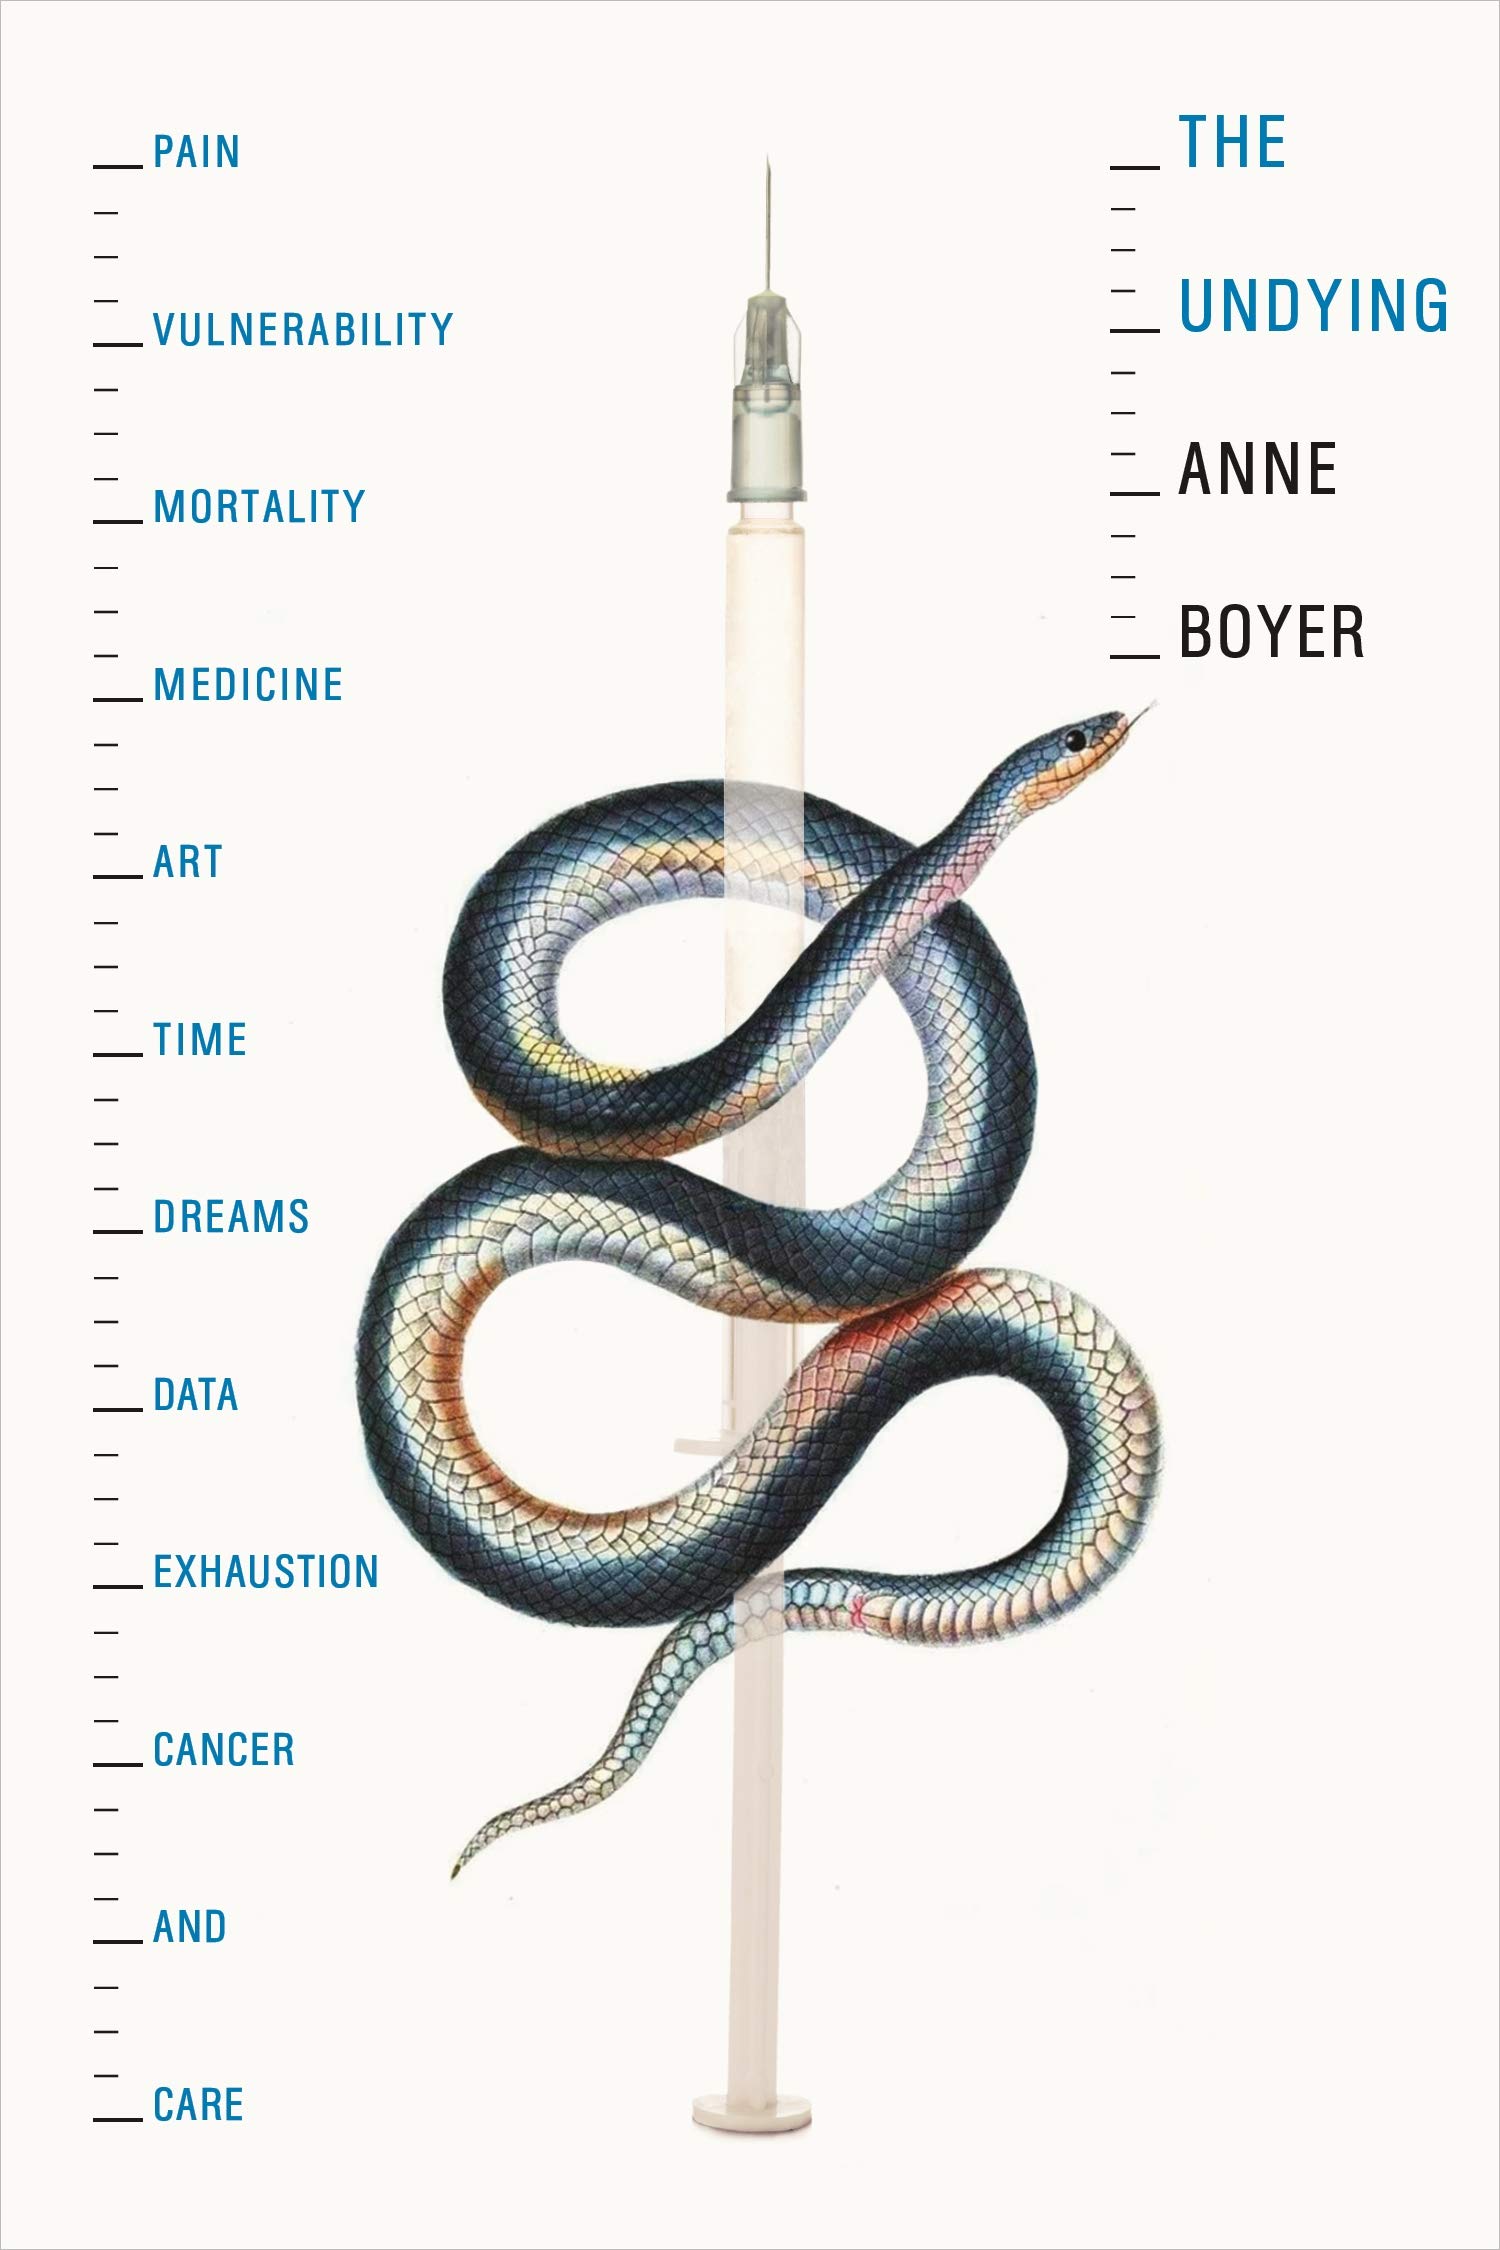 the undying anne boyer